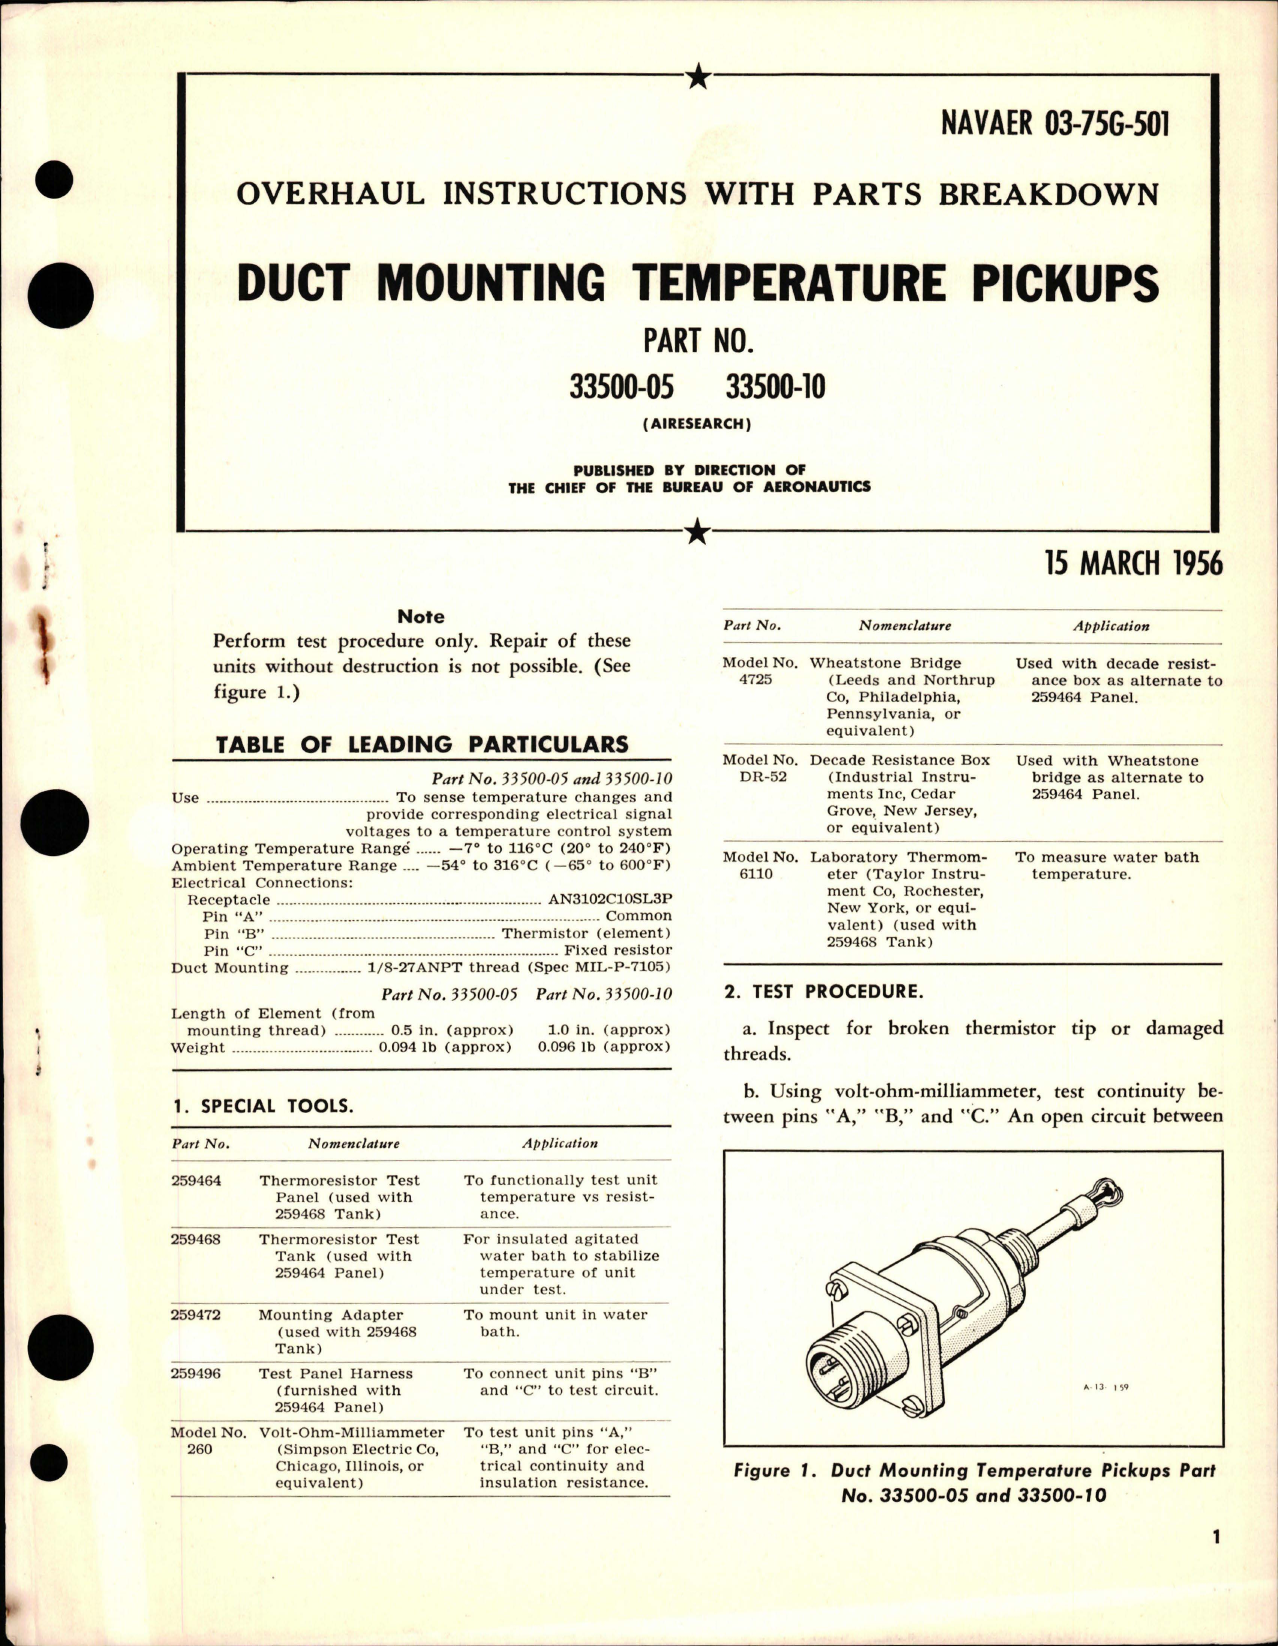 Sample page 1 from AirCorps Library document: Overhaul Instructions with Parts Breakdown for Duct Mounting Temperature Pickups - Part - 33500-05 and 33500-10